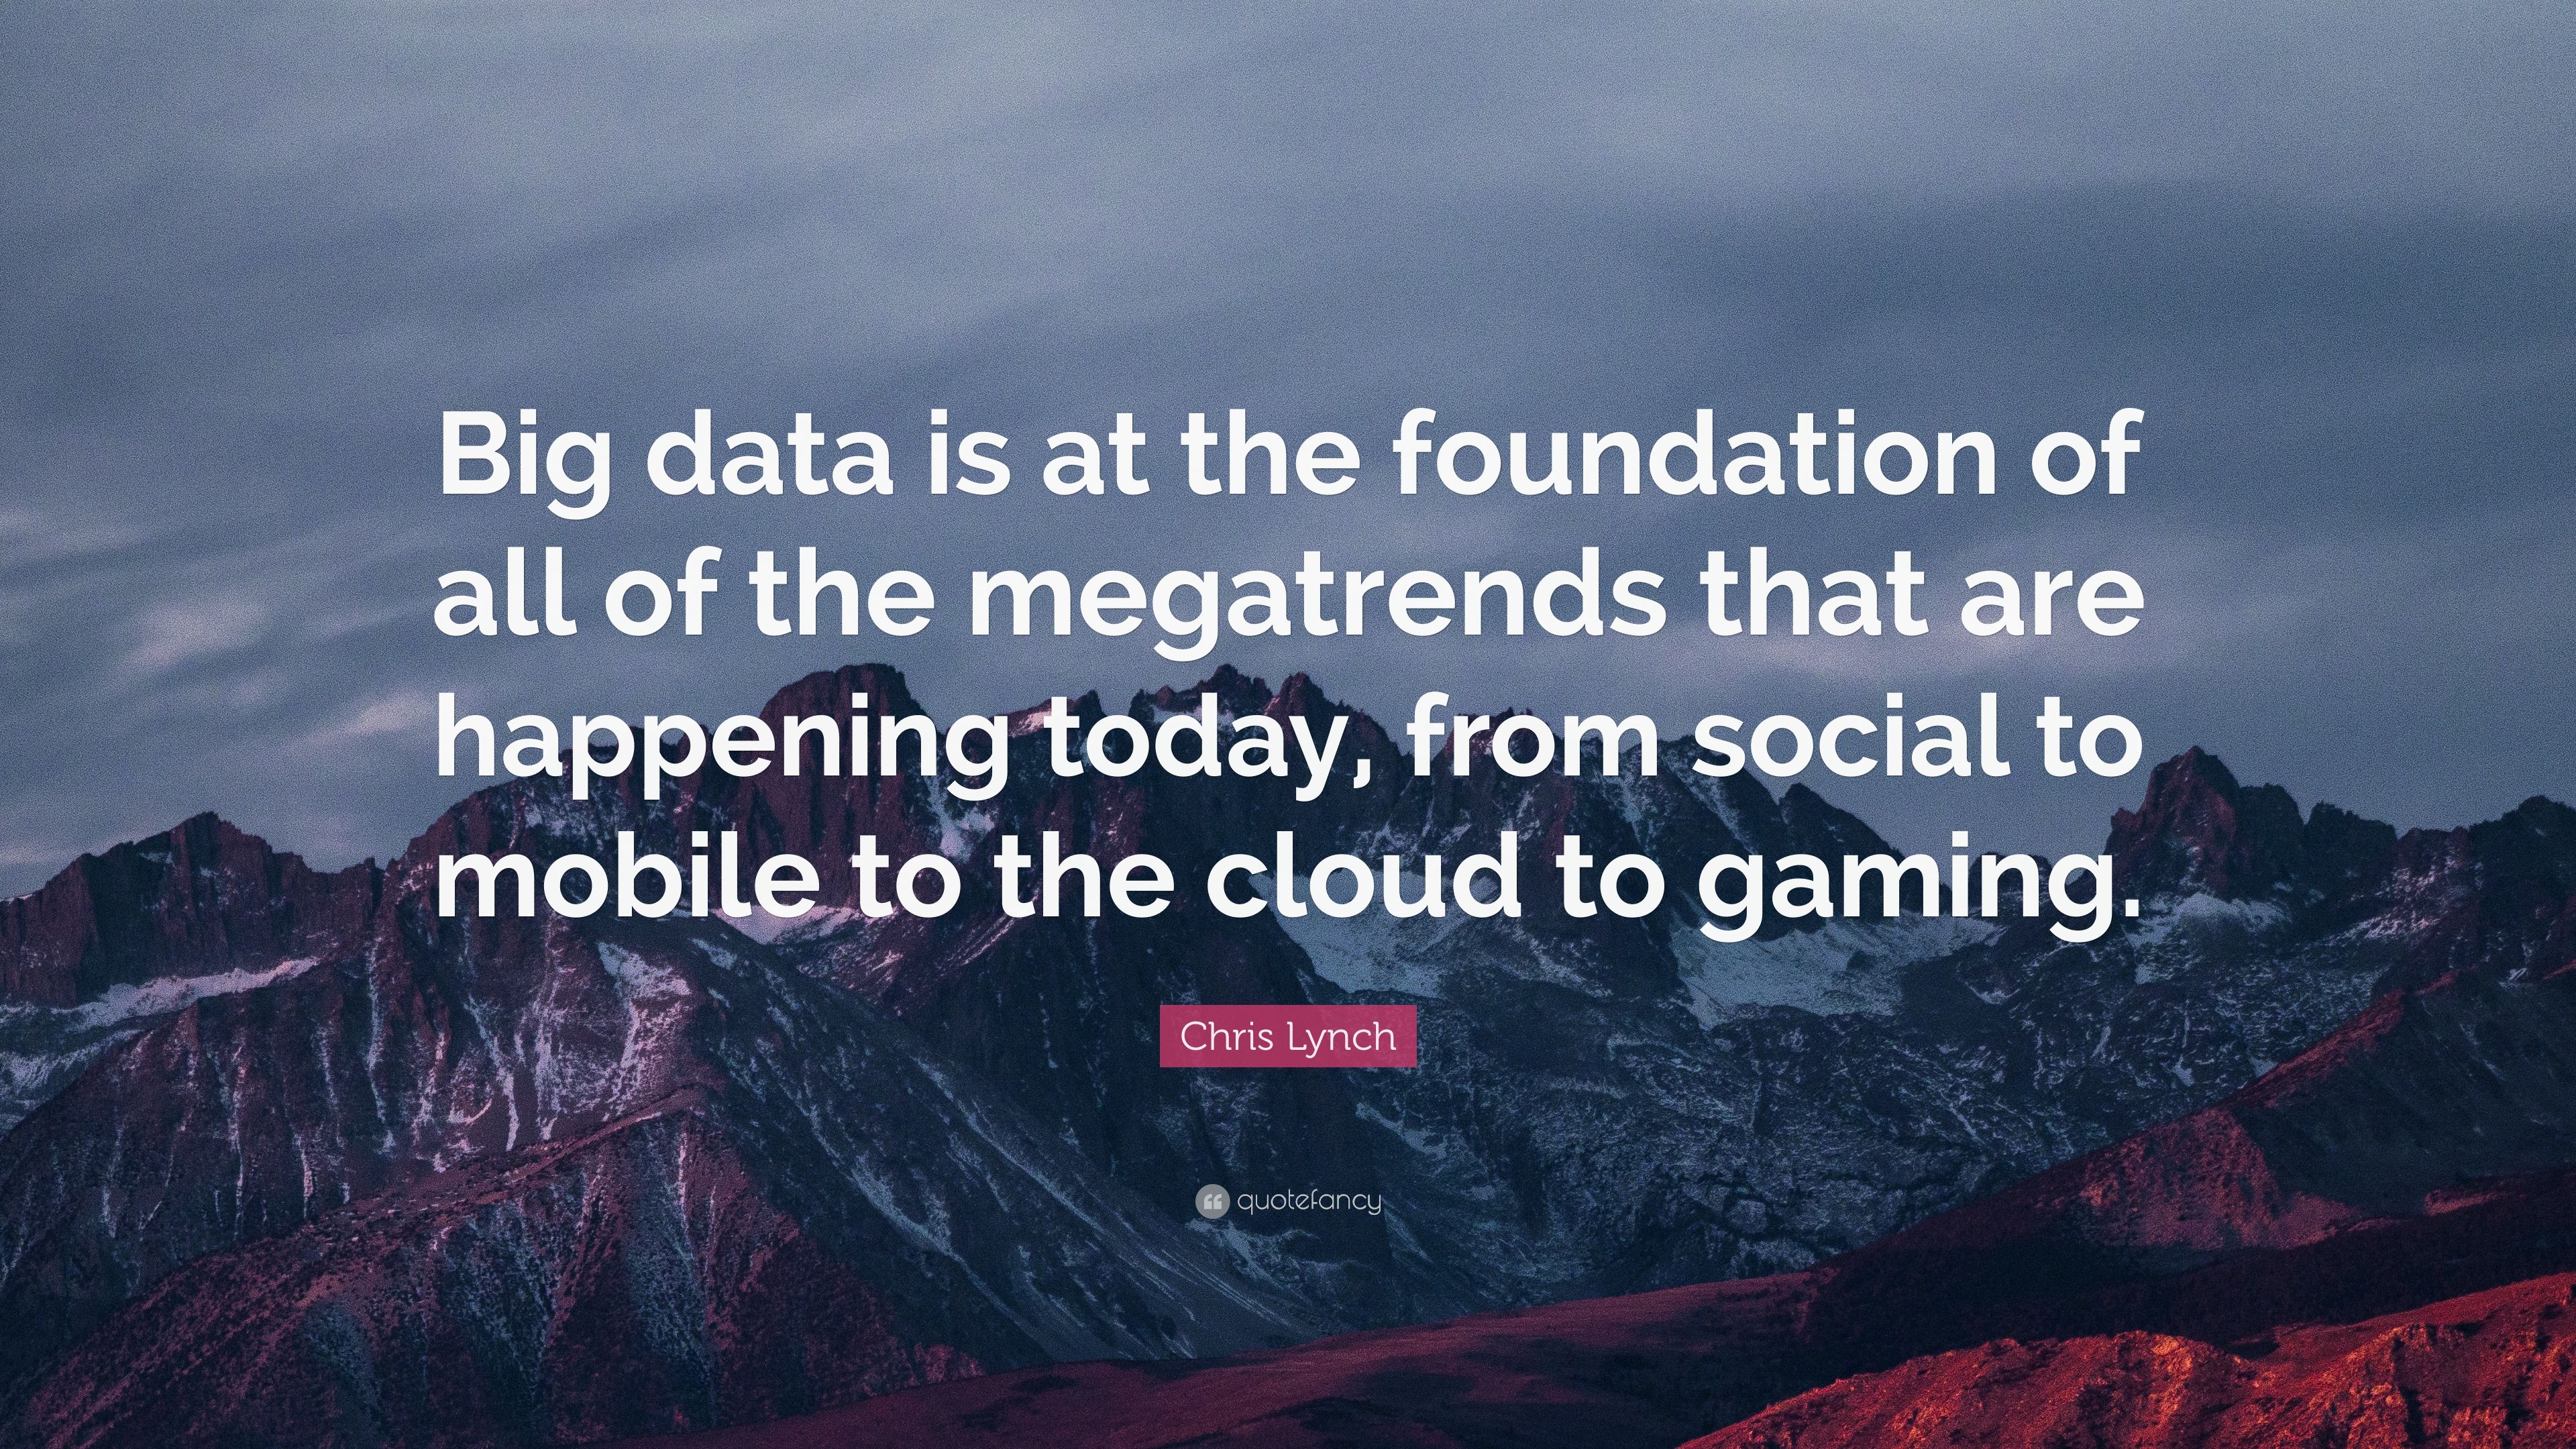 Chris Lynch Quote: “Big data is at the foundation of all